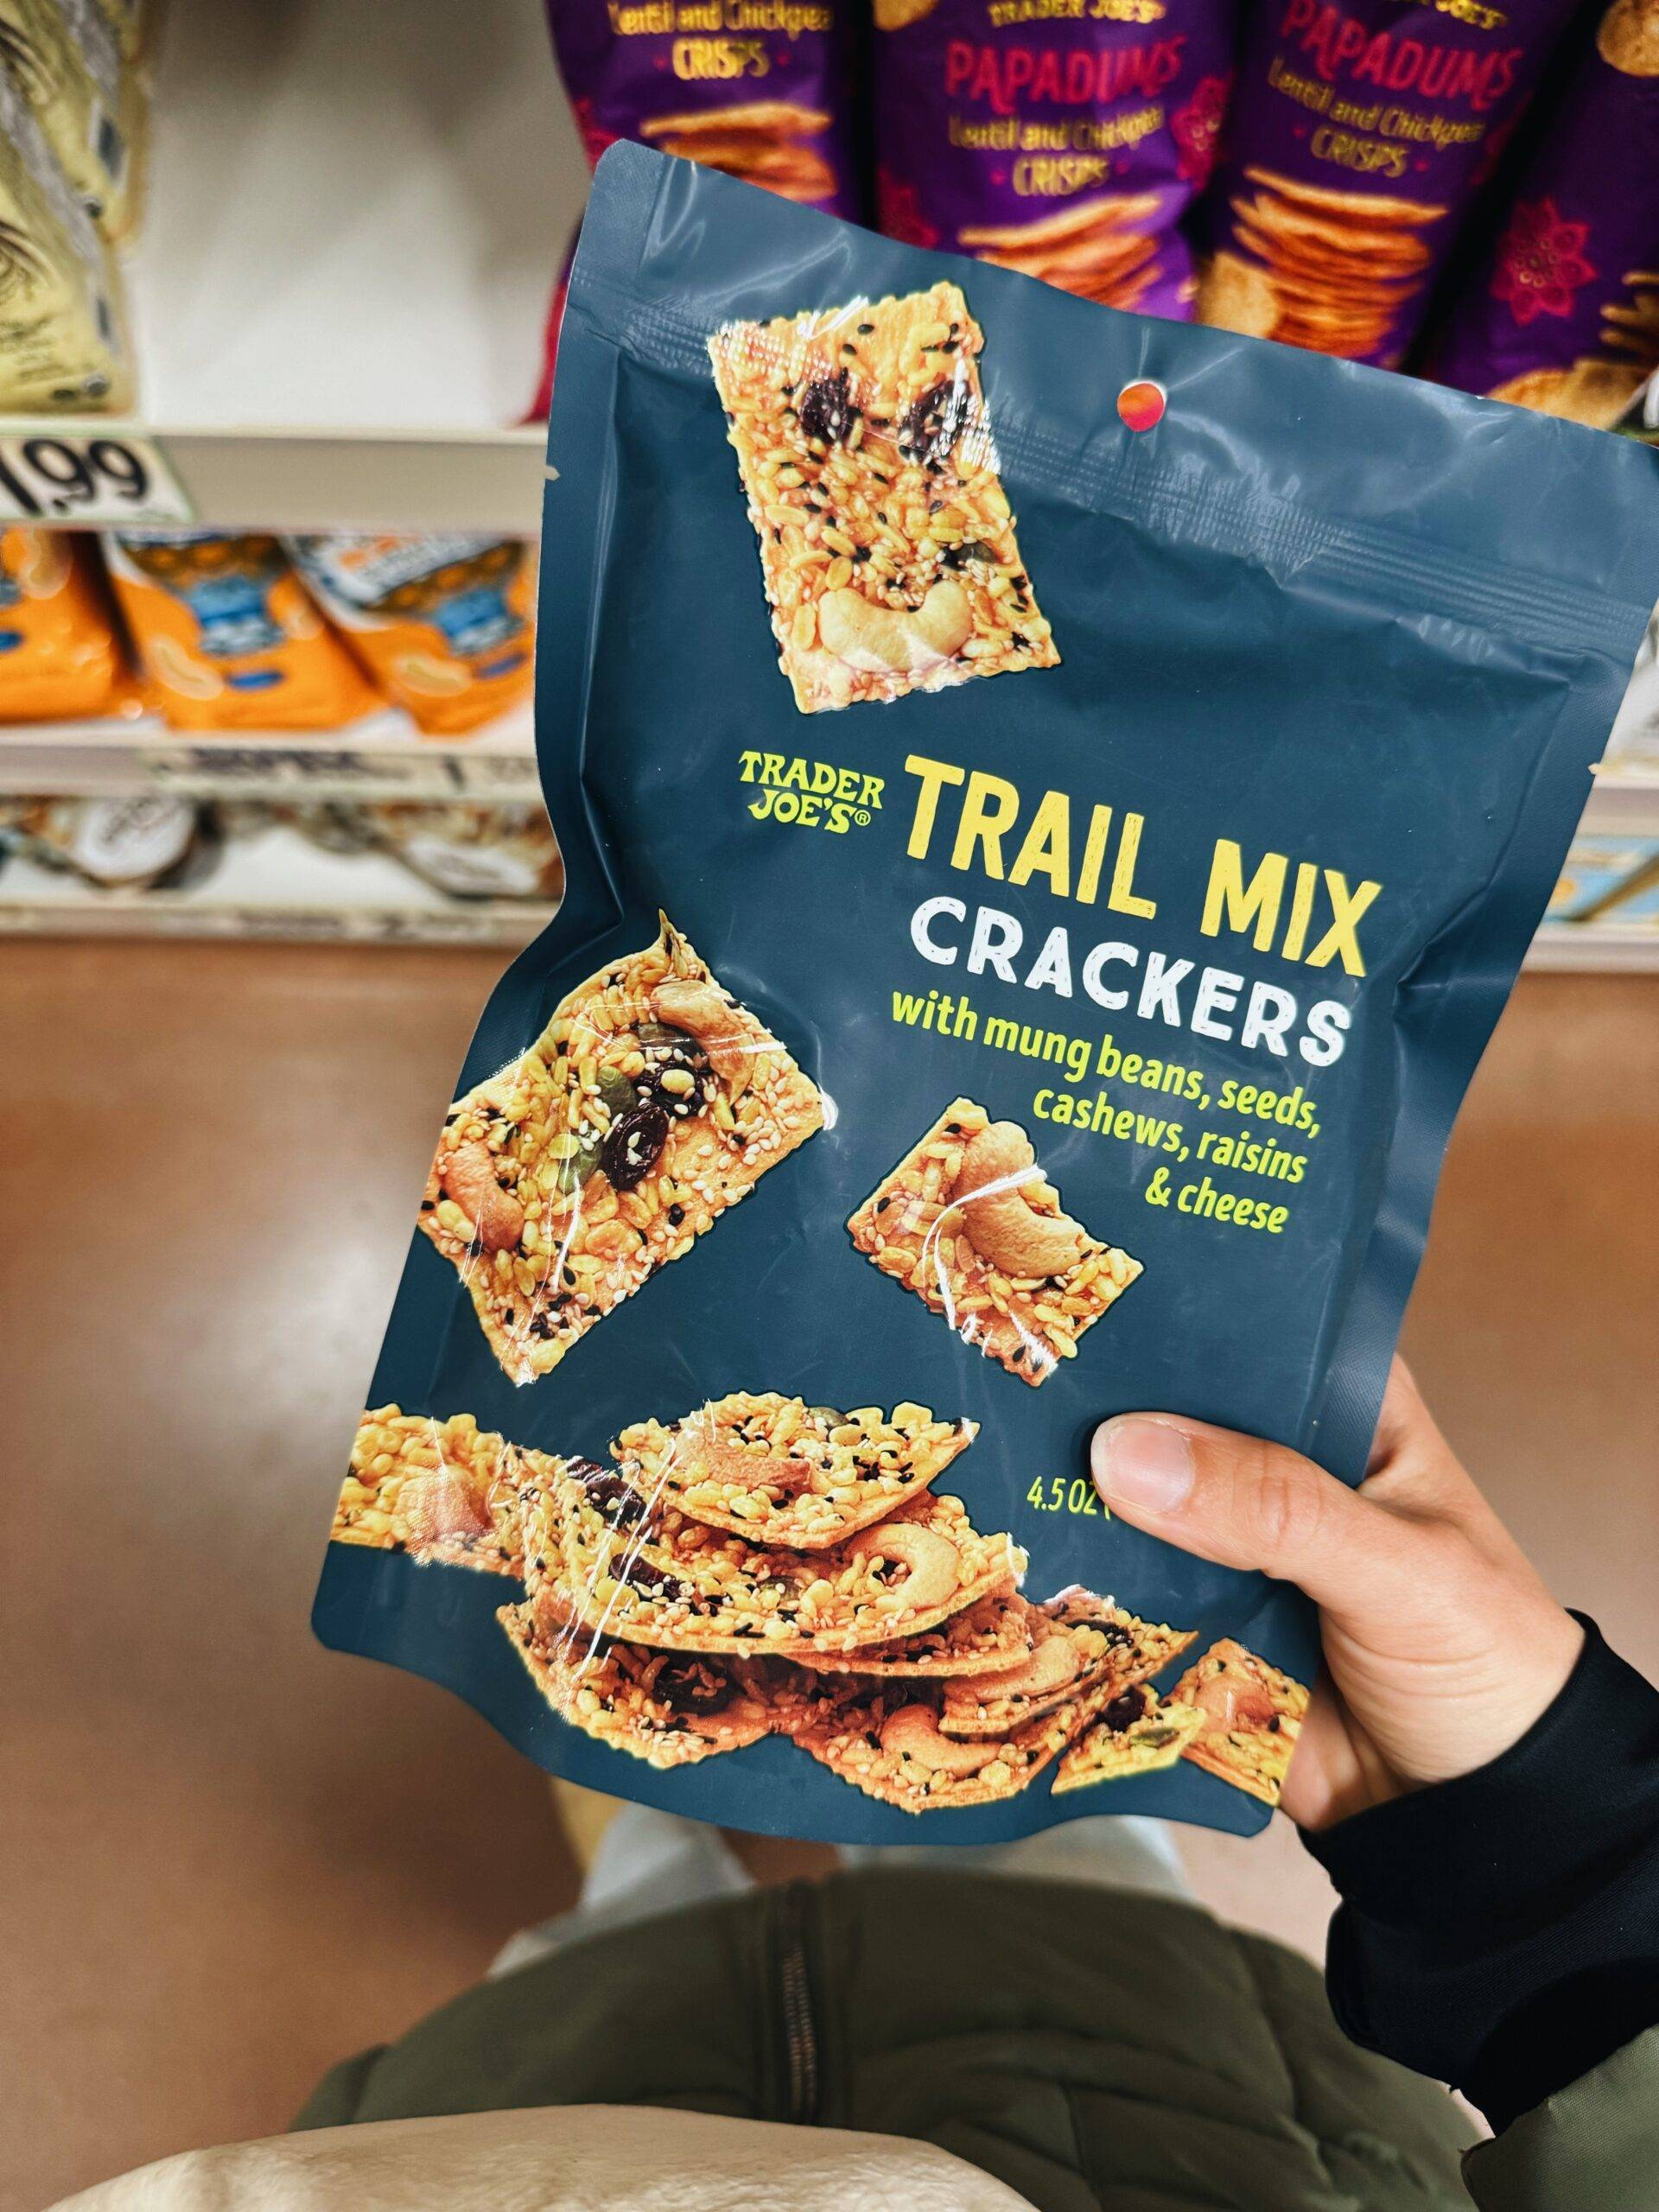 Trail mix crackers in a bag.